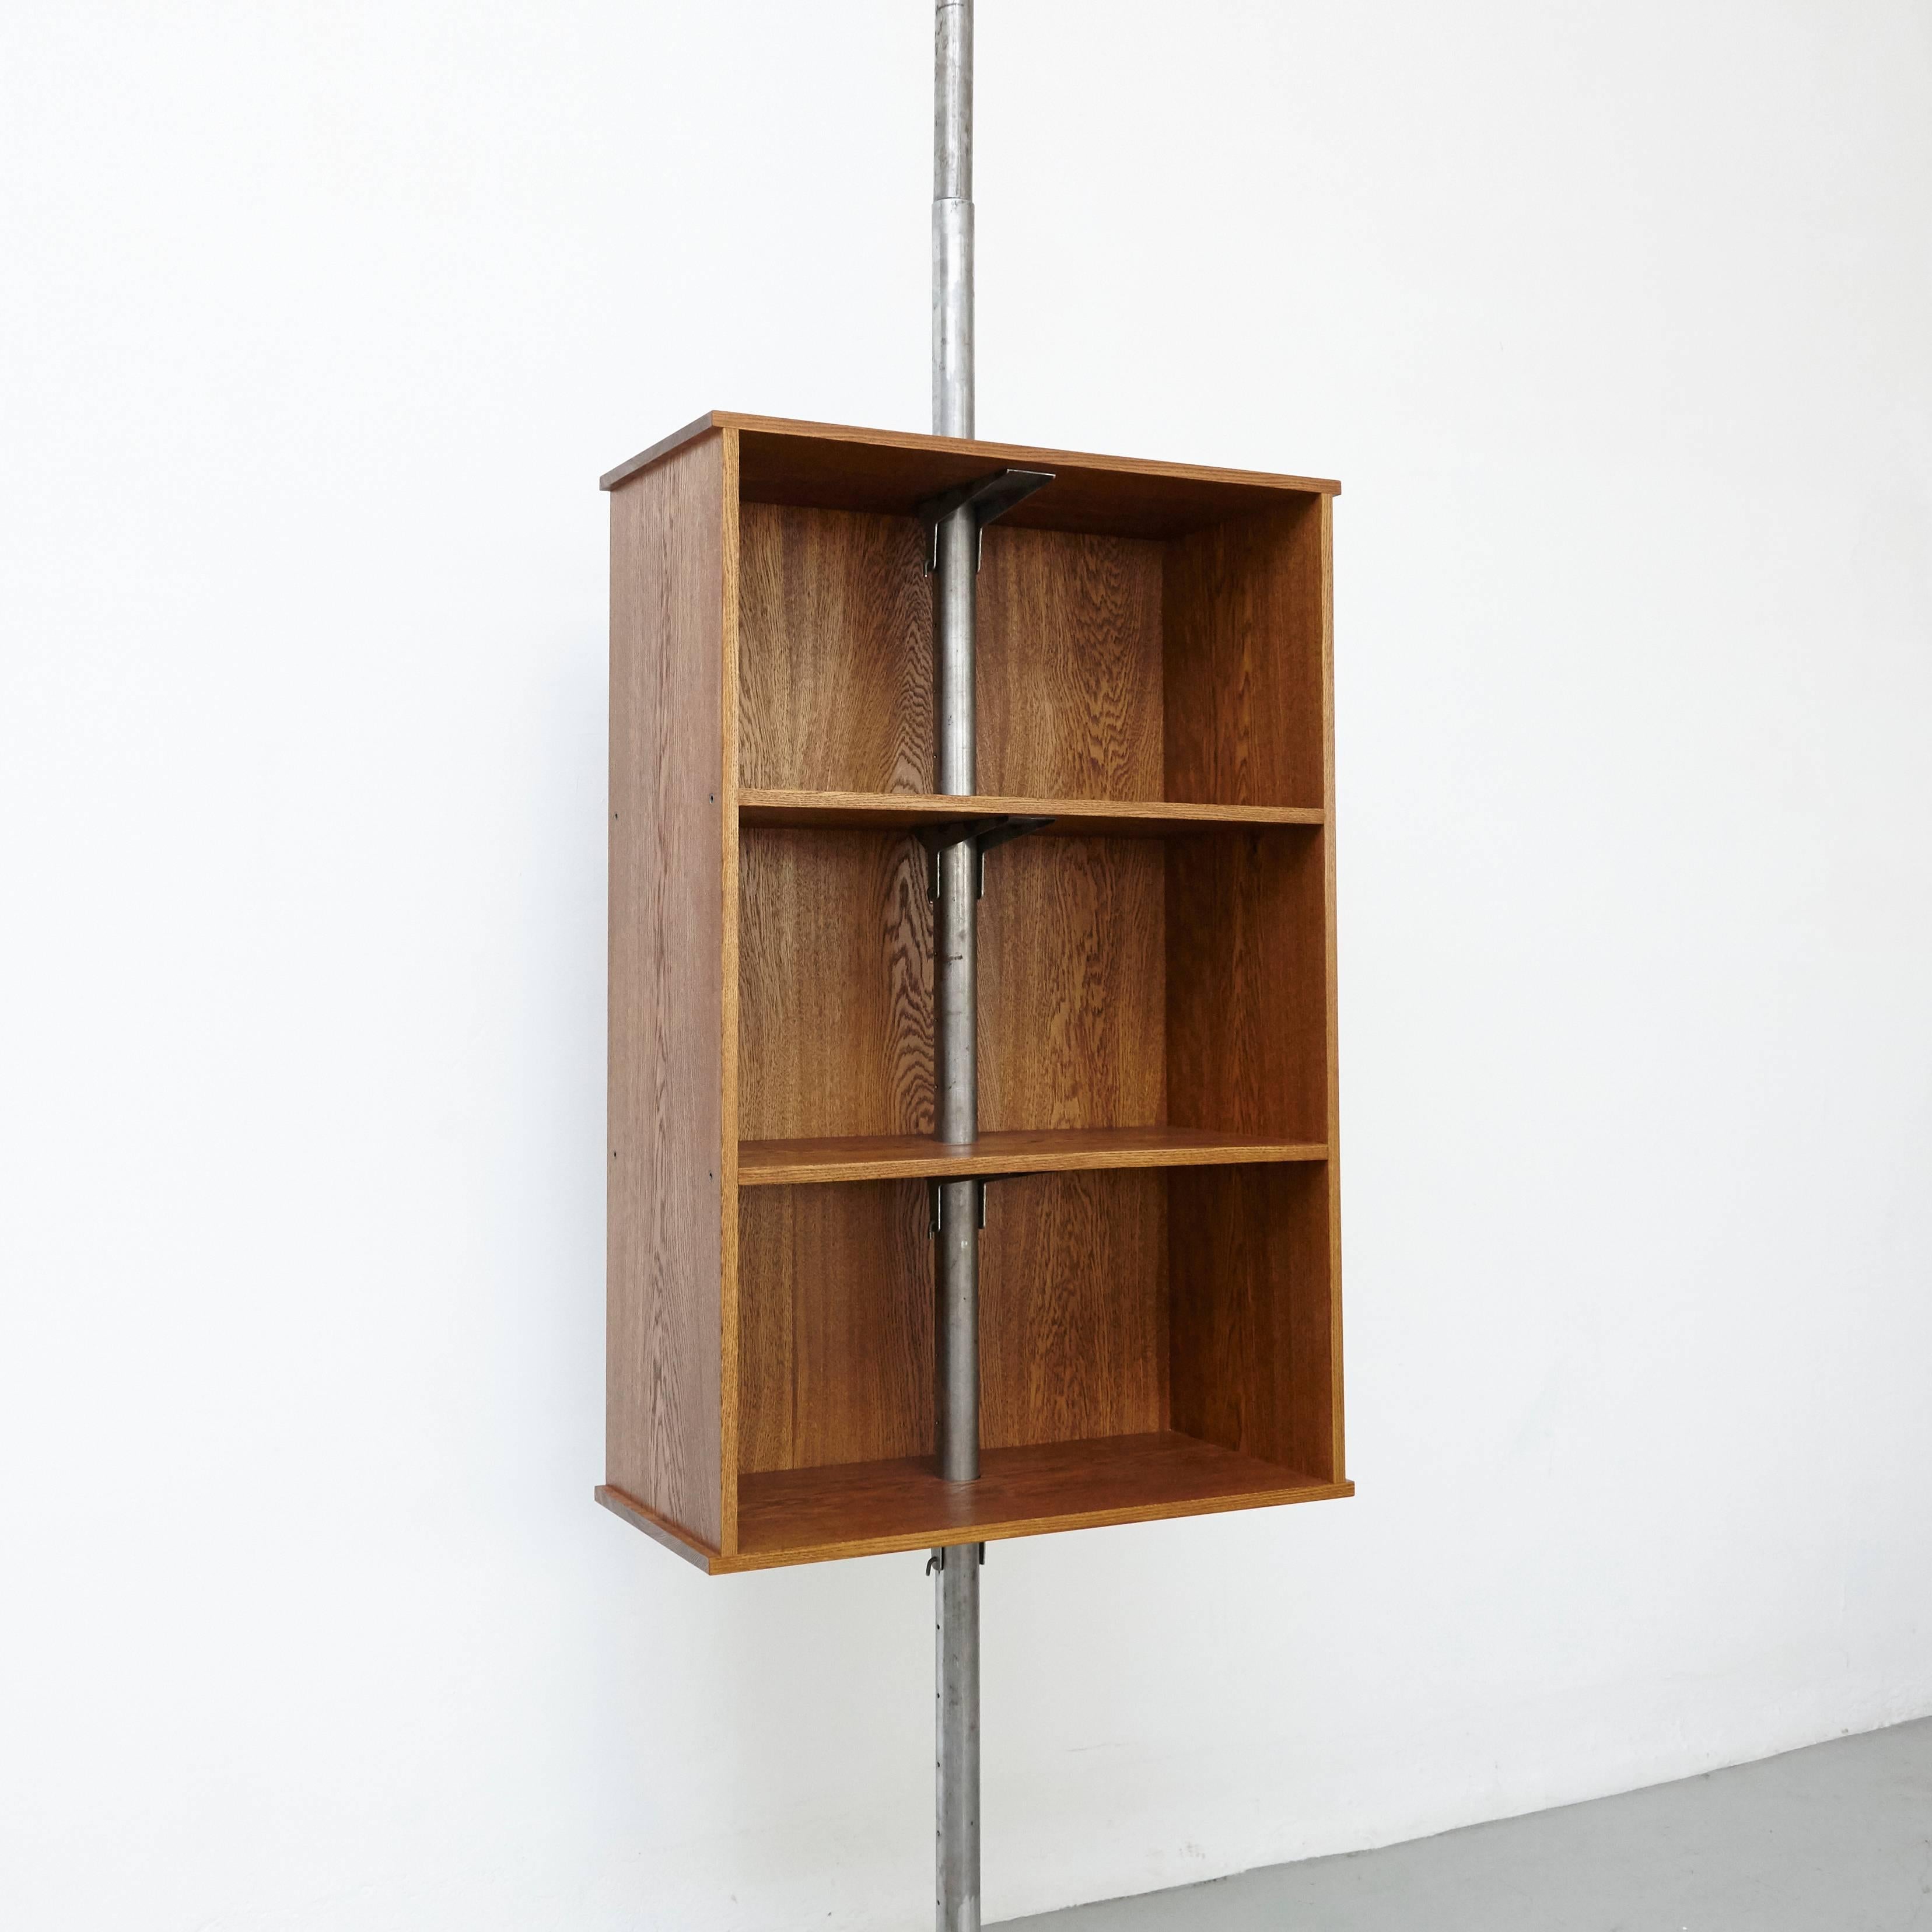 Bibliotheque designed by dada - est. manufactured in Barcelona, 2017.

Adjustable bibliotheque suspended,

Iron and oak

Measures: 40 x 91 x 420 cm.
  